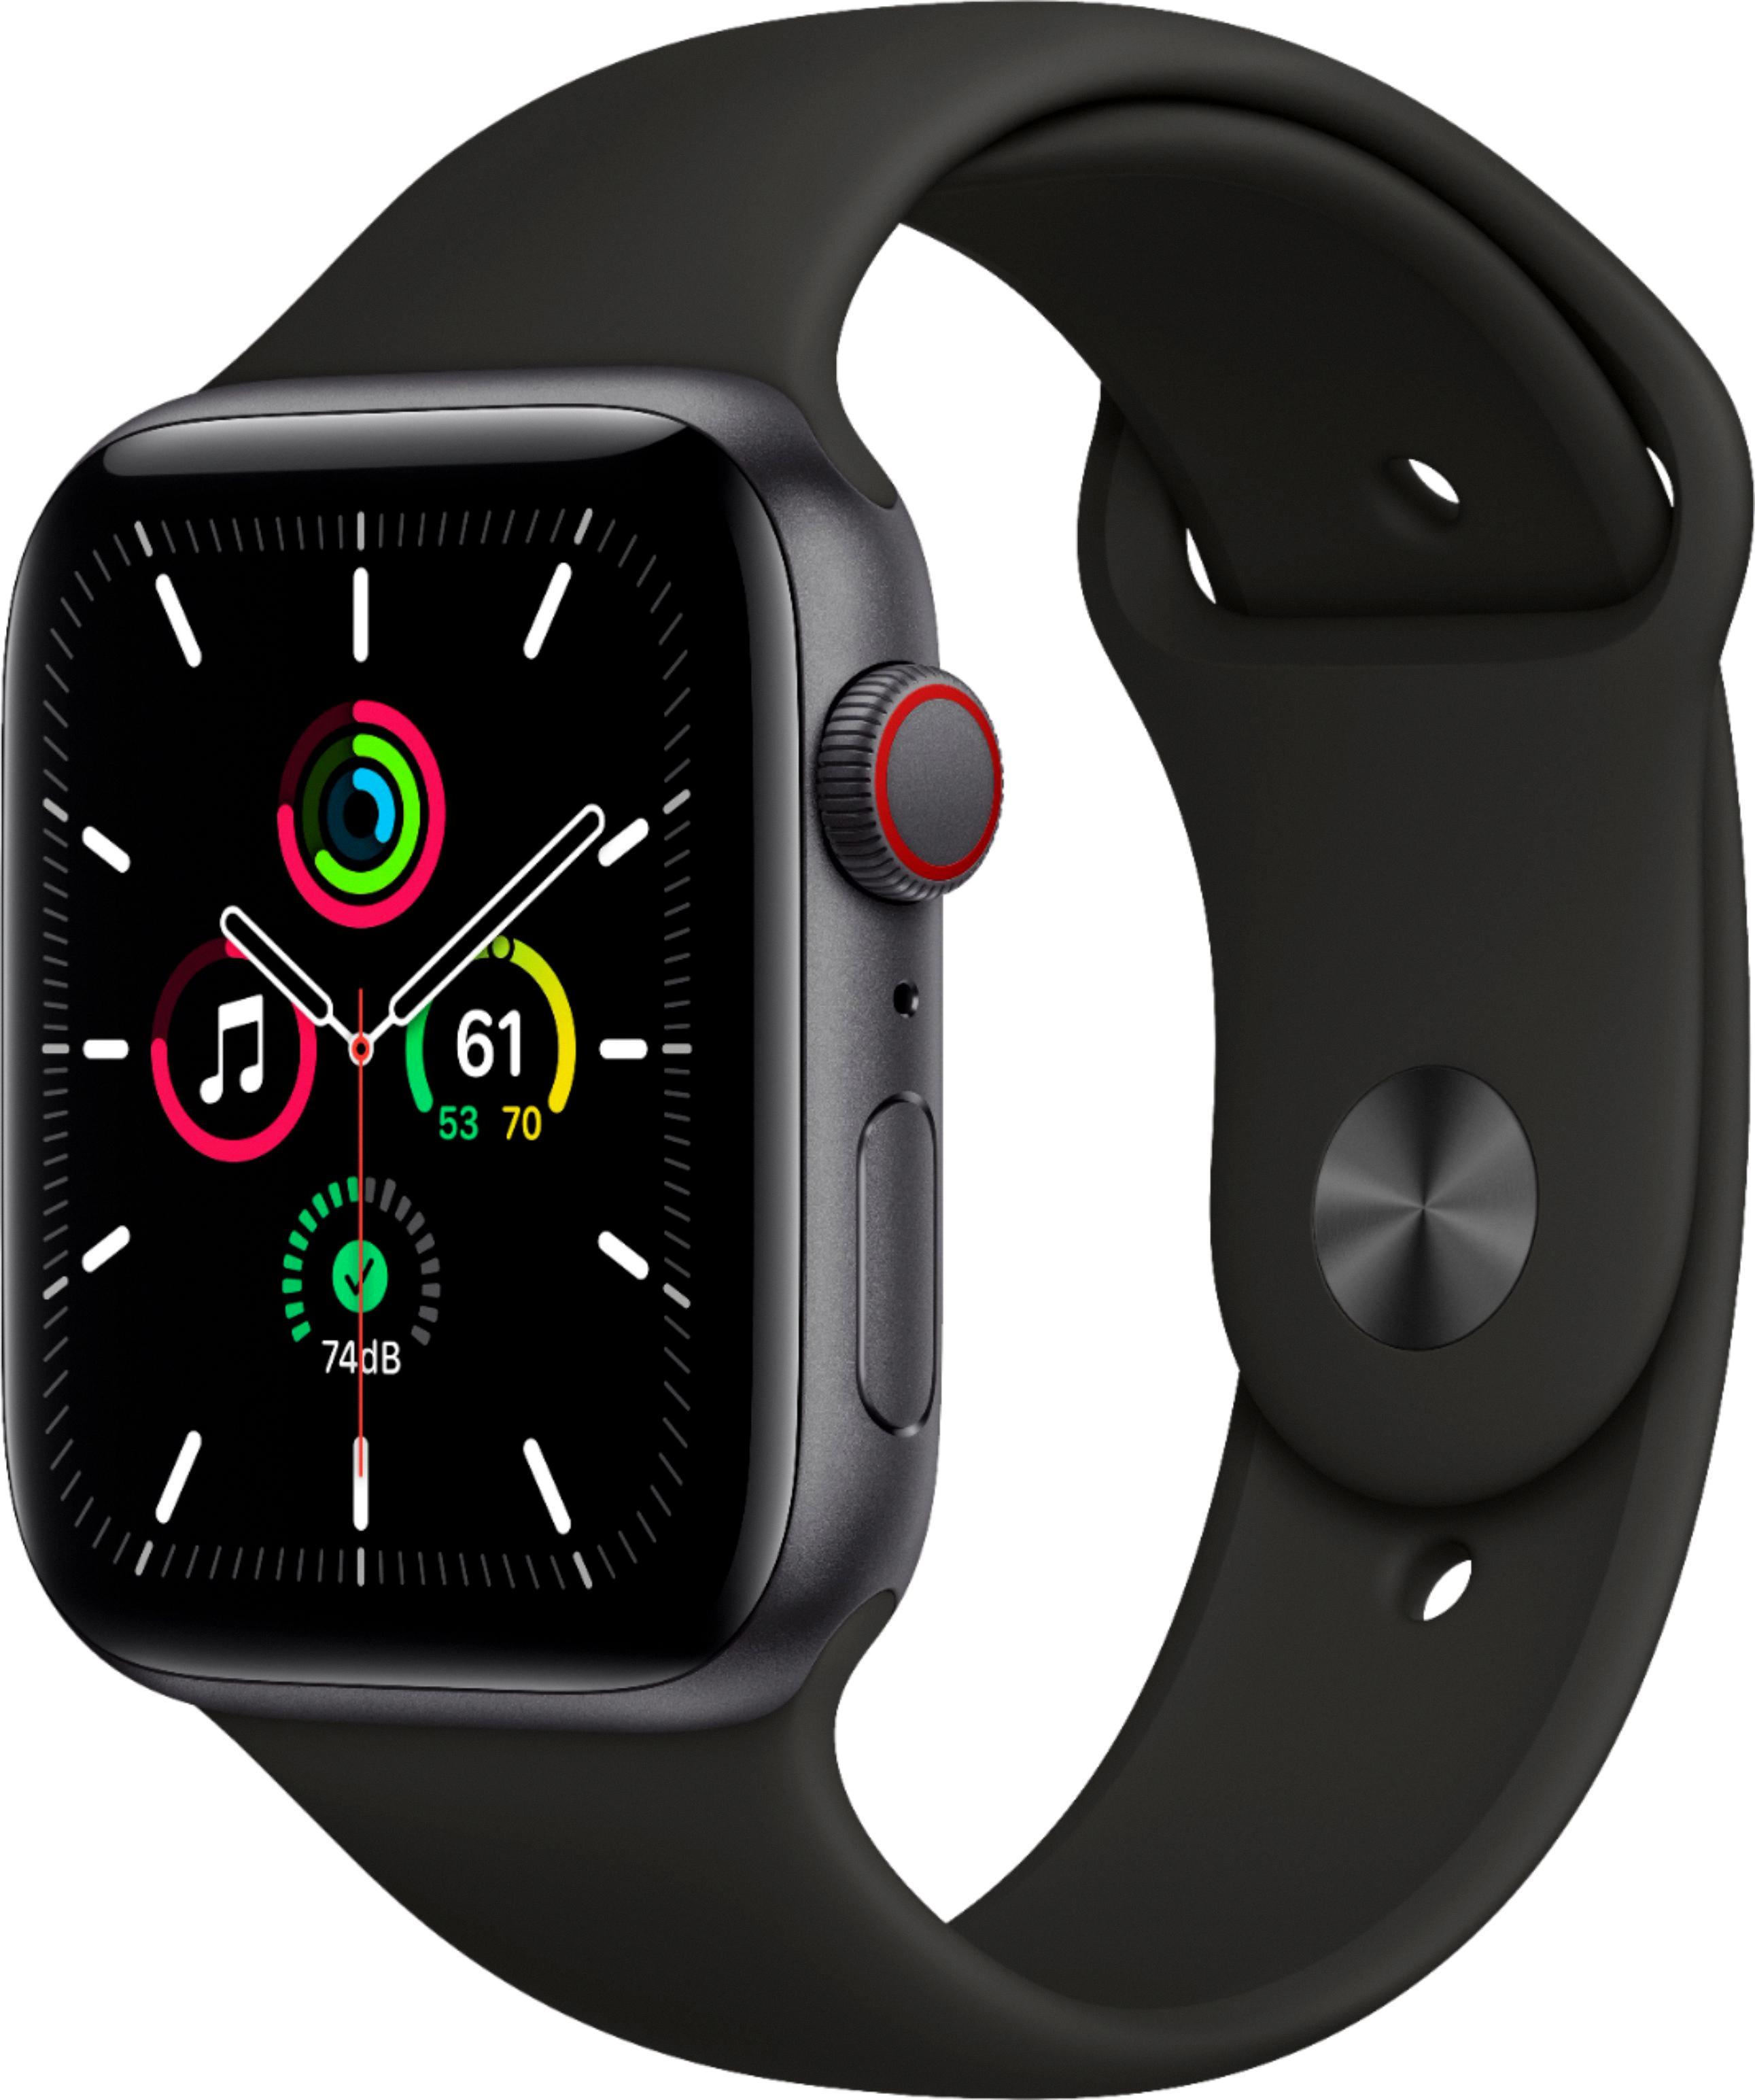 How Much It Cost To Add Apple Watch to Verizon 9